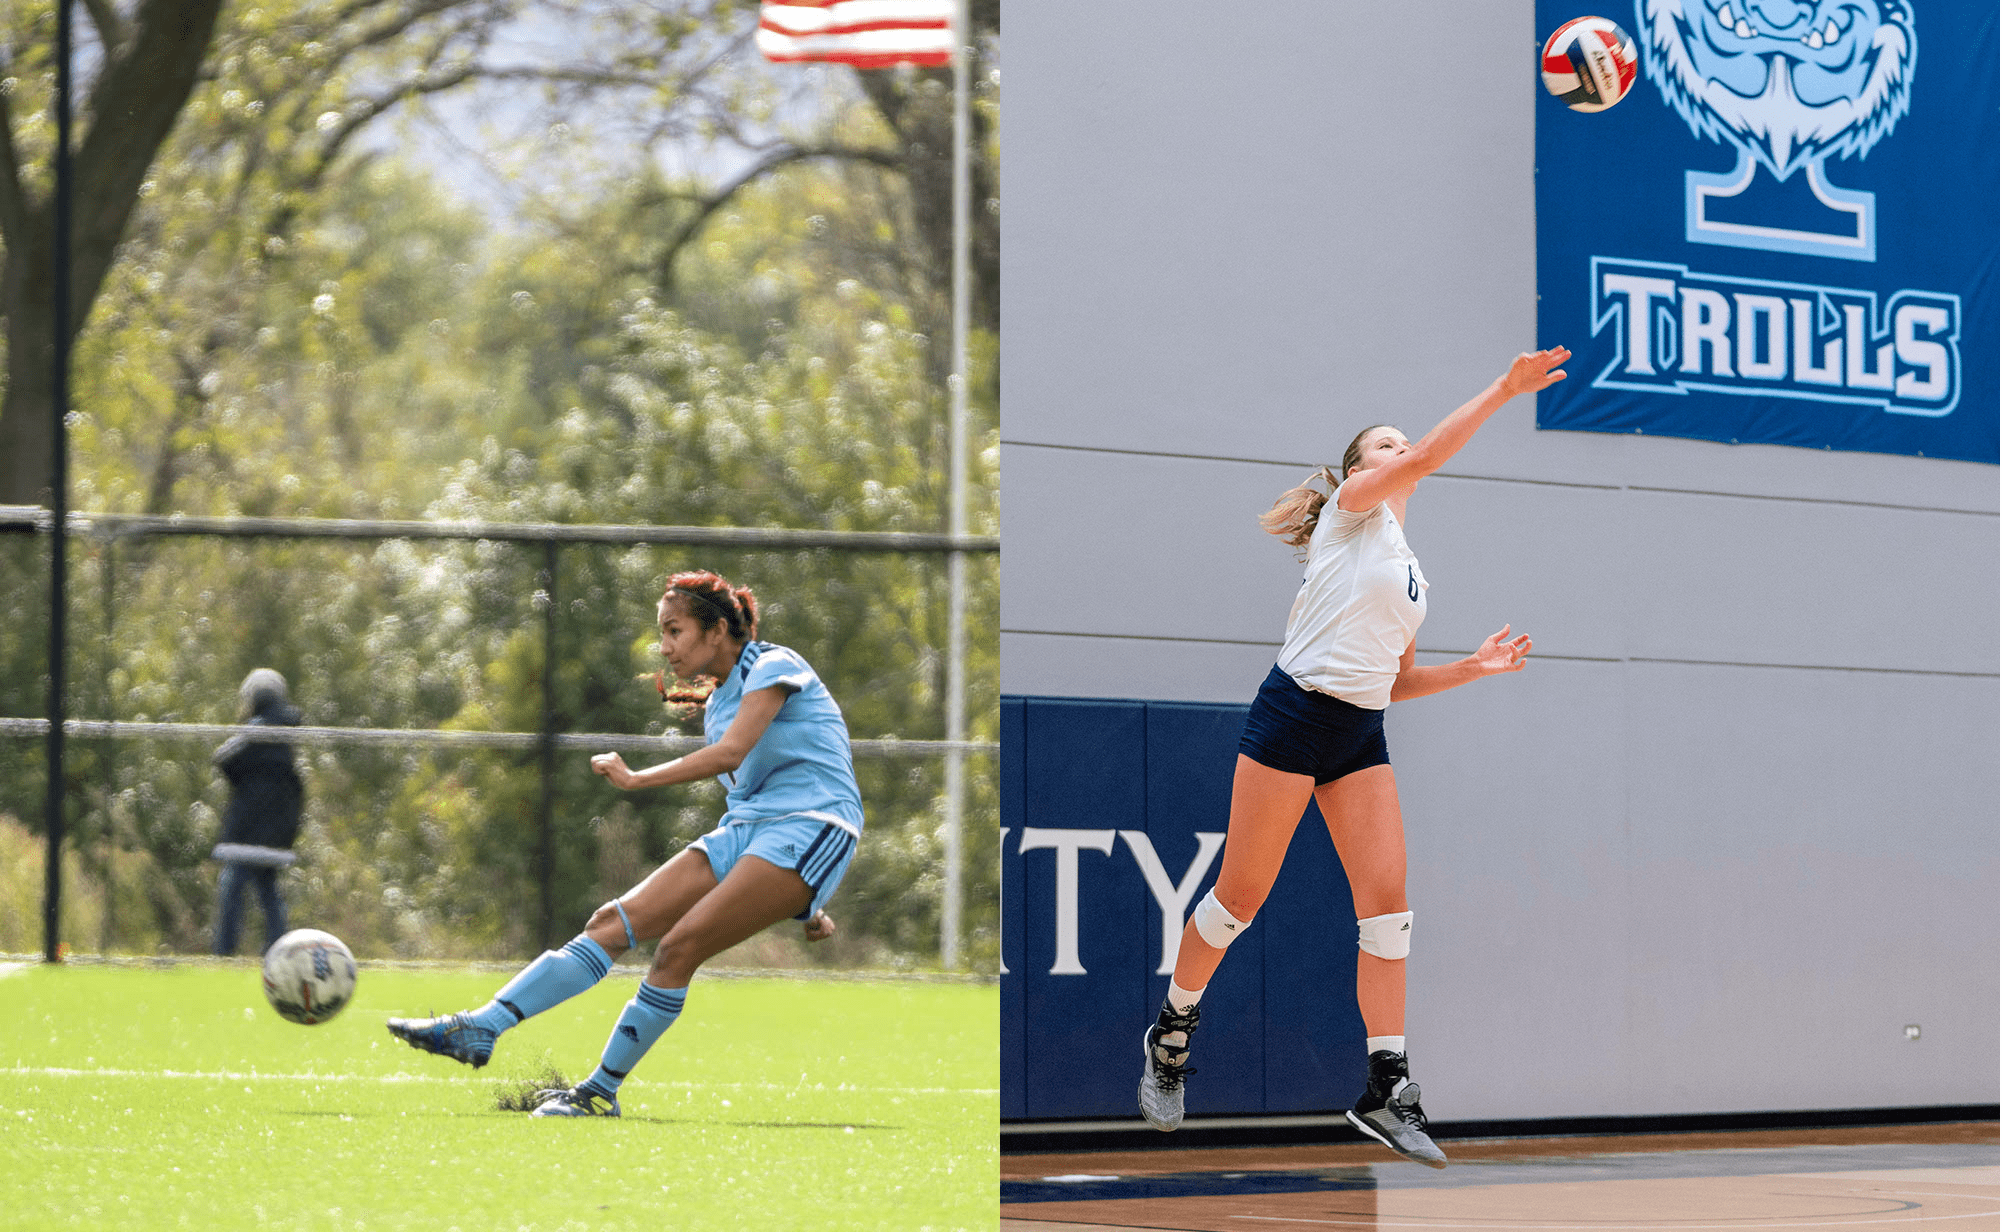 The women’s volleyball team will compete in the 39th Annual NAIA National Volleyball Championship and the women’s soccer team will be making their tournament appearance at the NCCAA DI Women's Soccer National Championship.